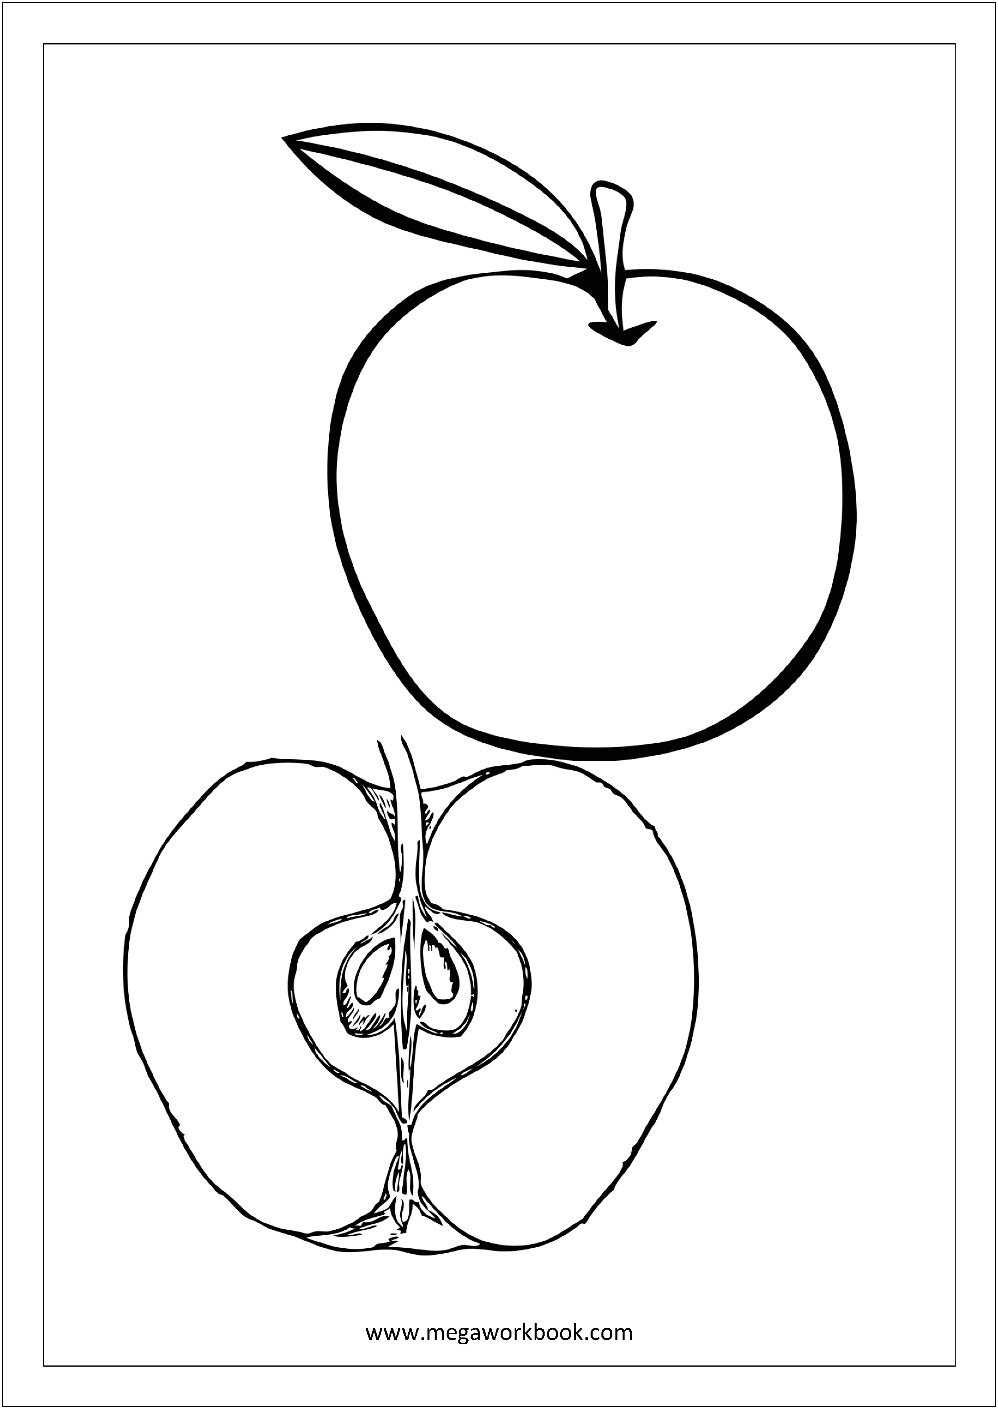 Free Printable Fruit And Vegetable Templates